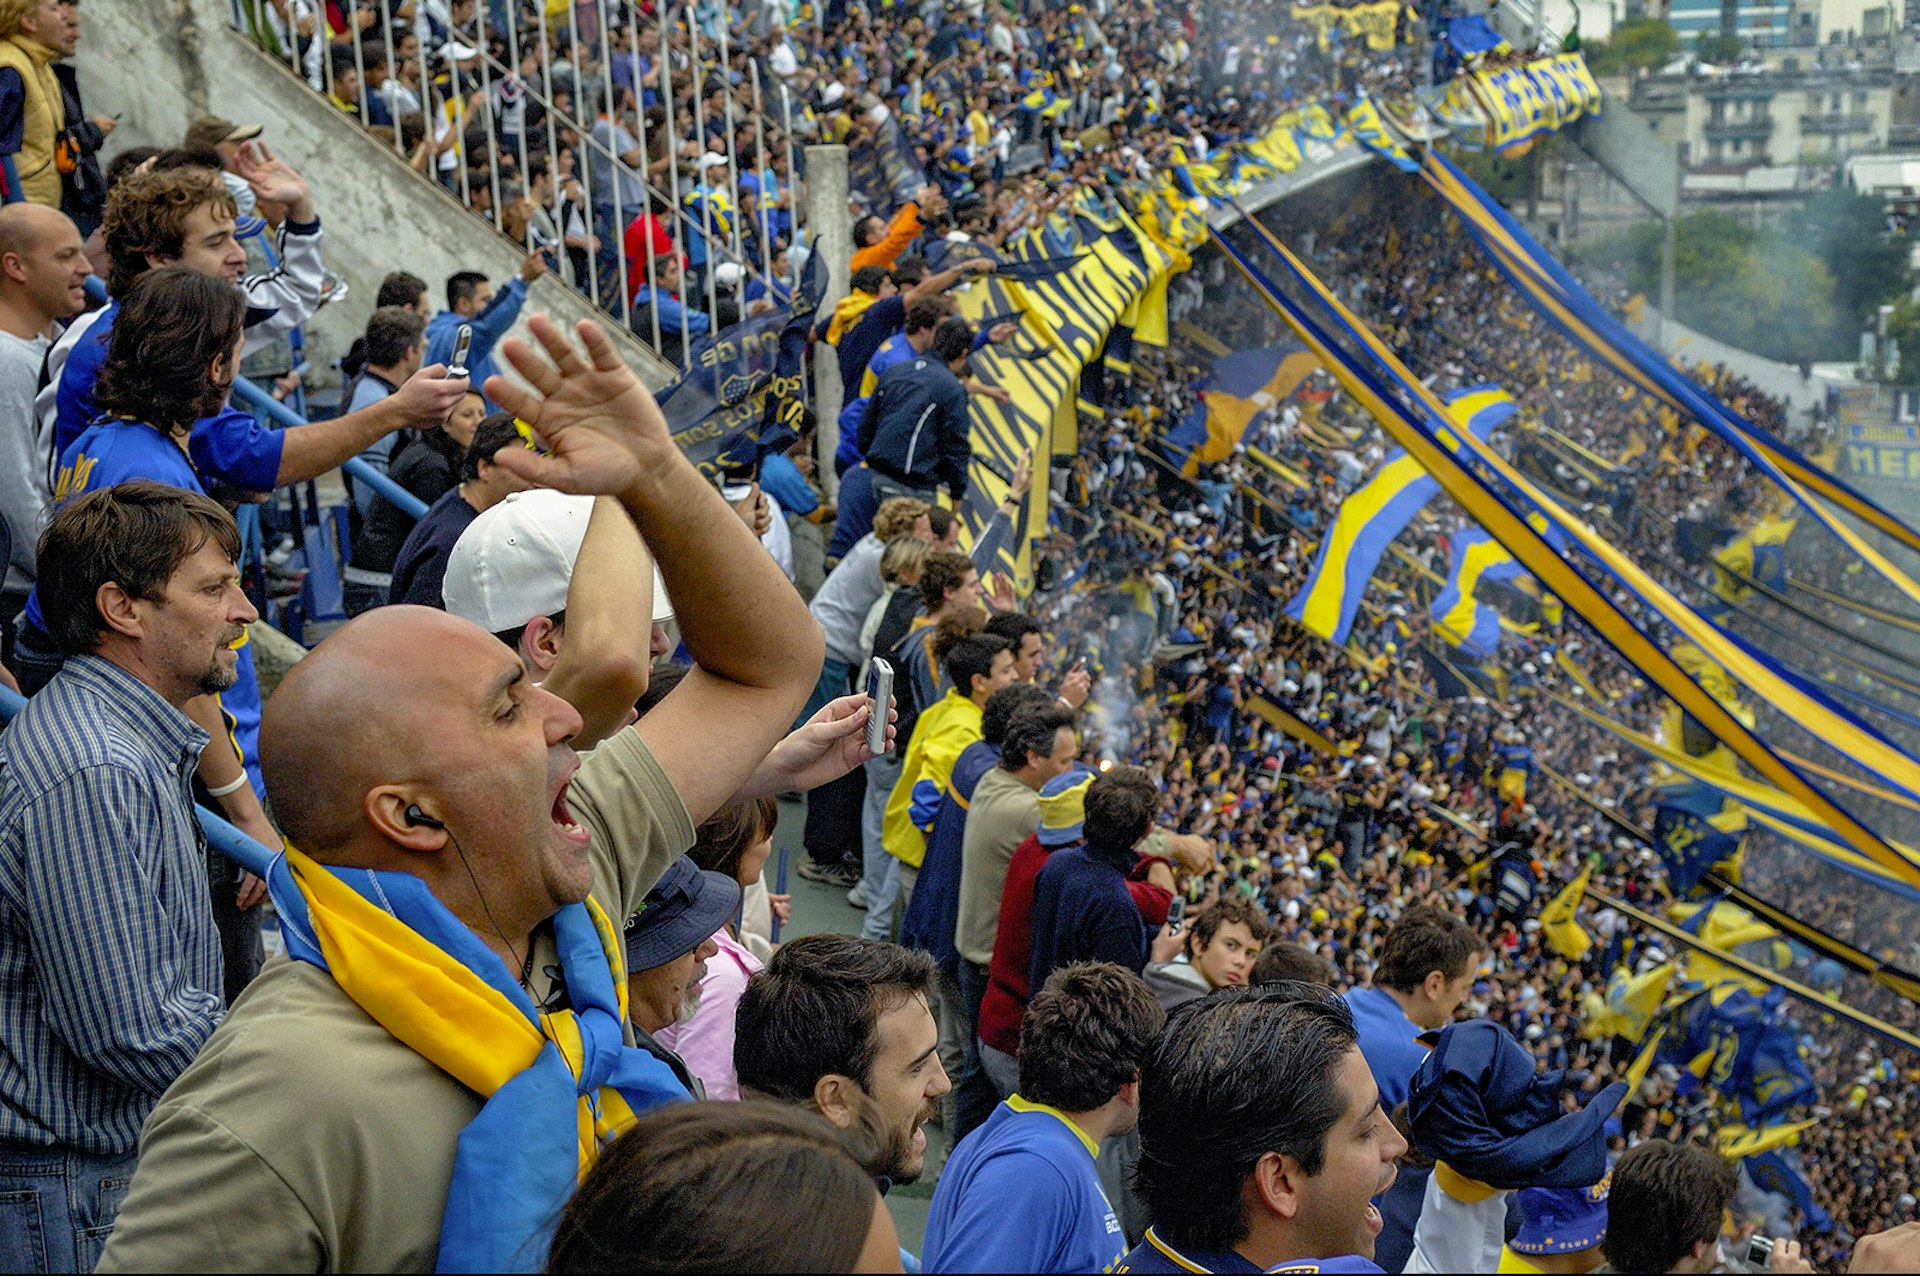 Fans dressed in blue and yellow cheering for their team at La Bombonera Stadium in Buenos Aires, Argentina